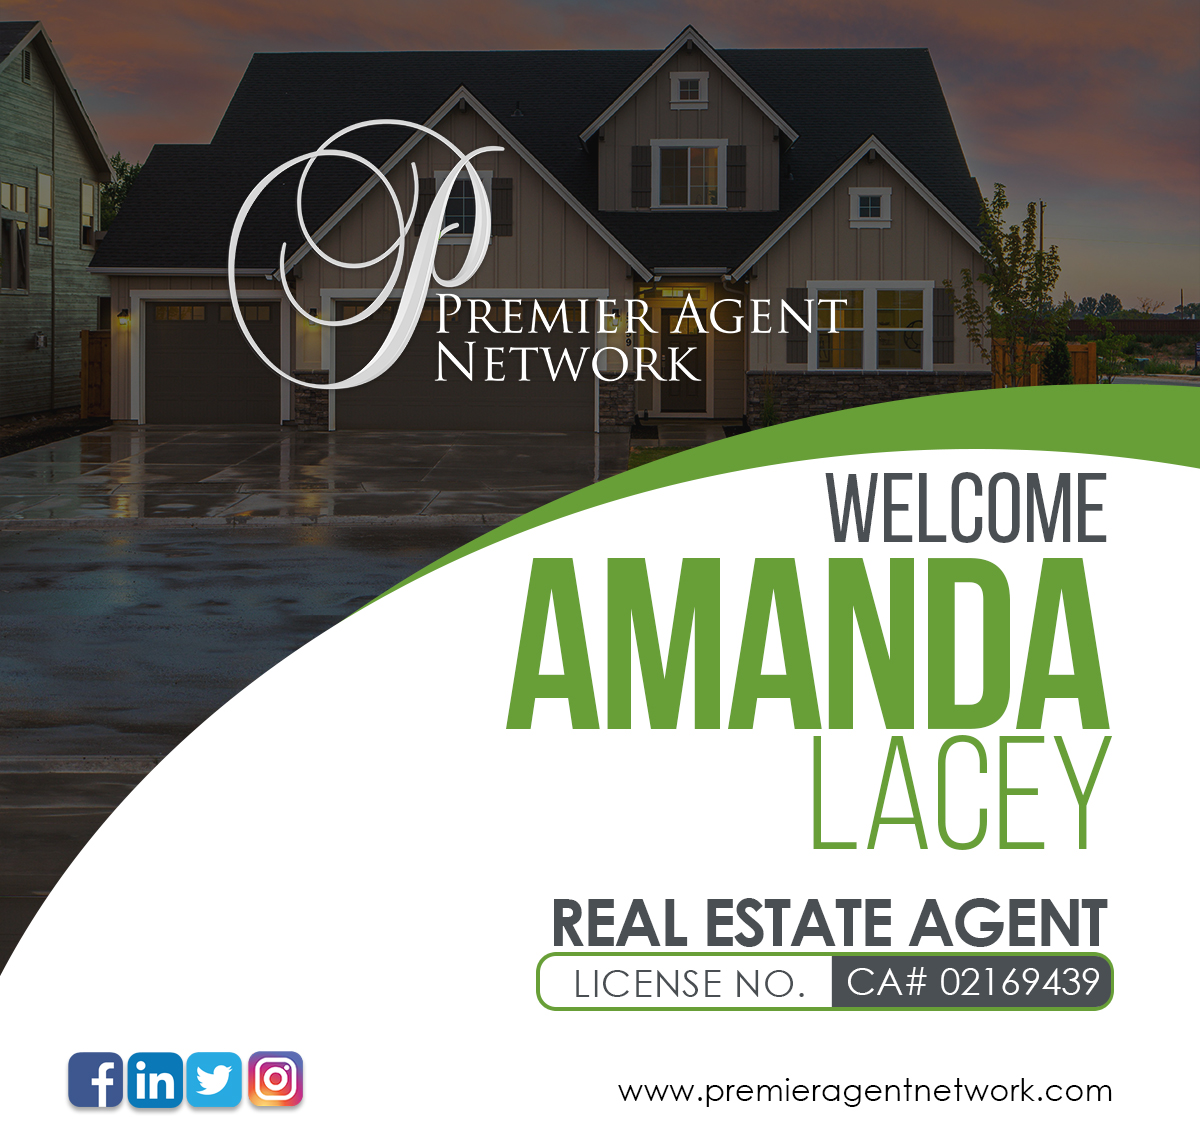 Welcoming Amanda Le Ann Lacey to the Premier Agent Network family!

Amanda will be servicing Coachella Valley, High Desert, California areas and can be reached at (760) 641-9244.

#newagent #welcome #premieragentnetwork #career #realestate #california #californiarealestate